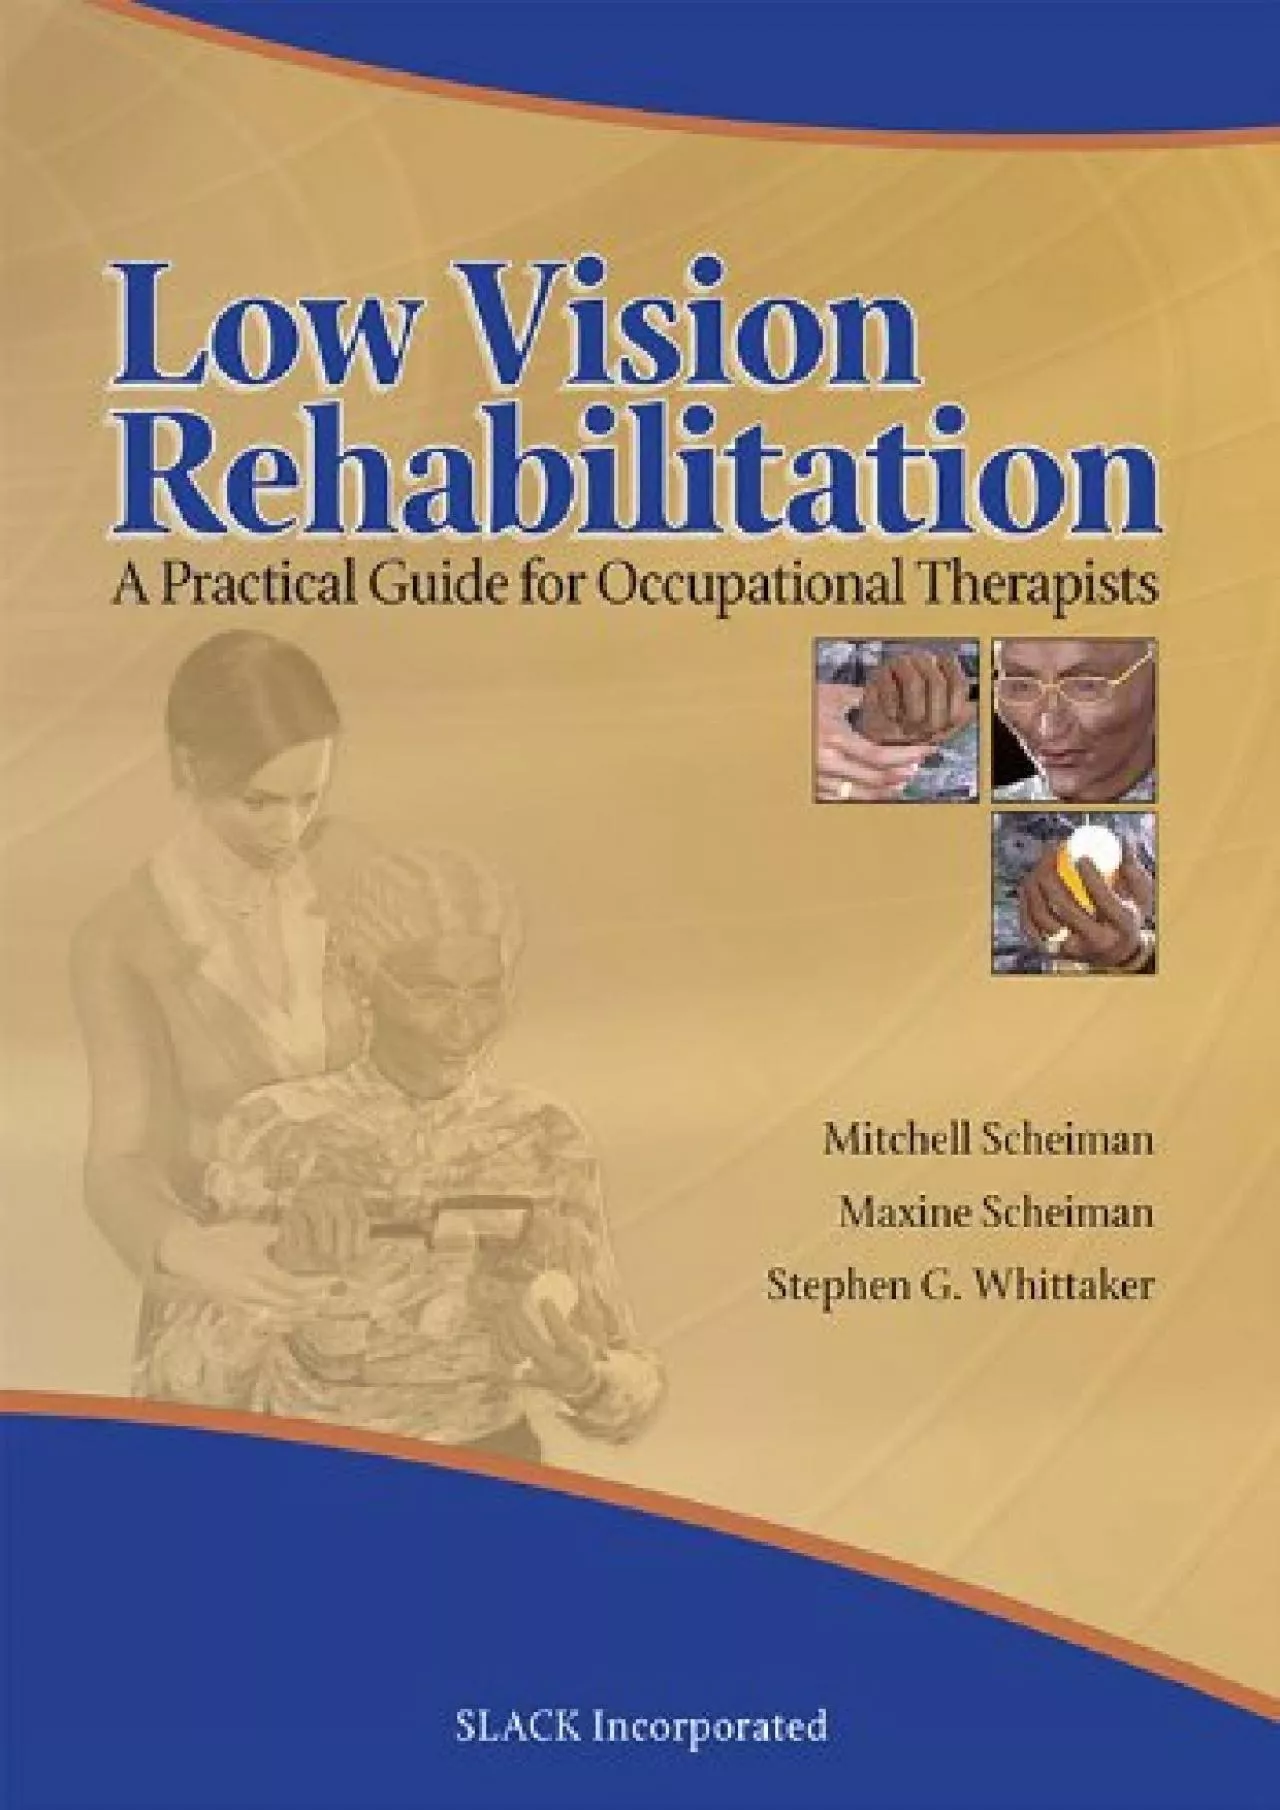 (EBOOK)-Low Vision Rehabilitation: A Practical Guide for Occupational Therapists